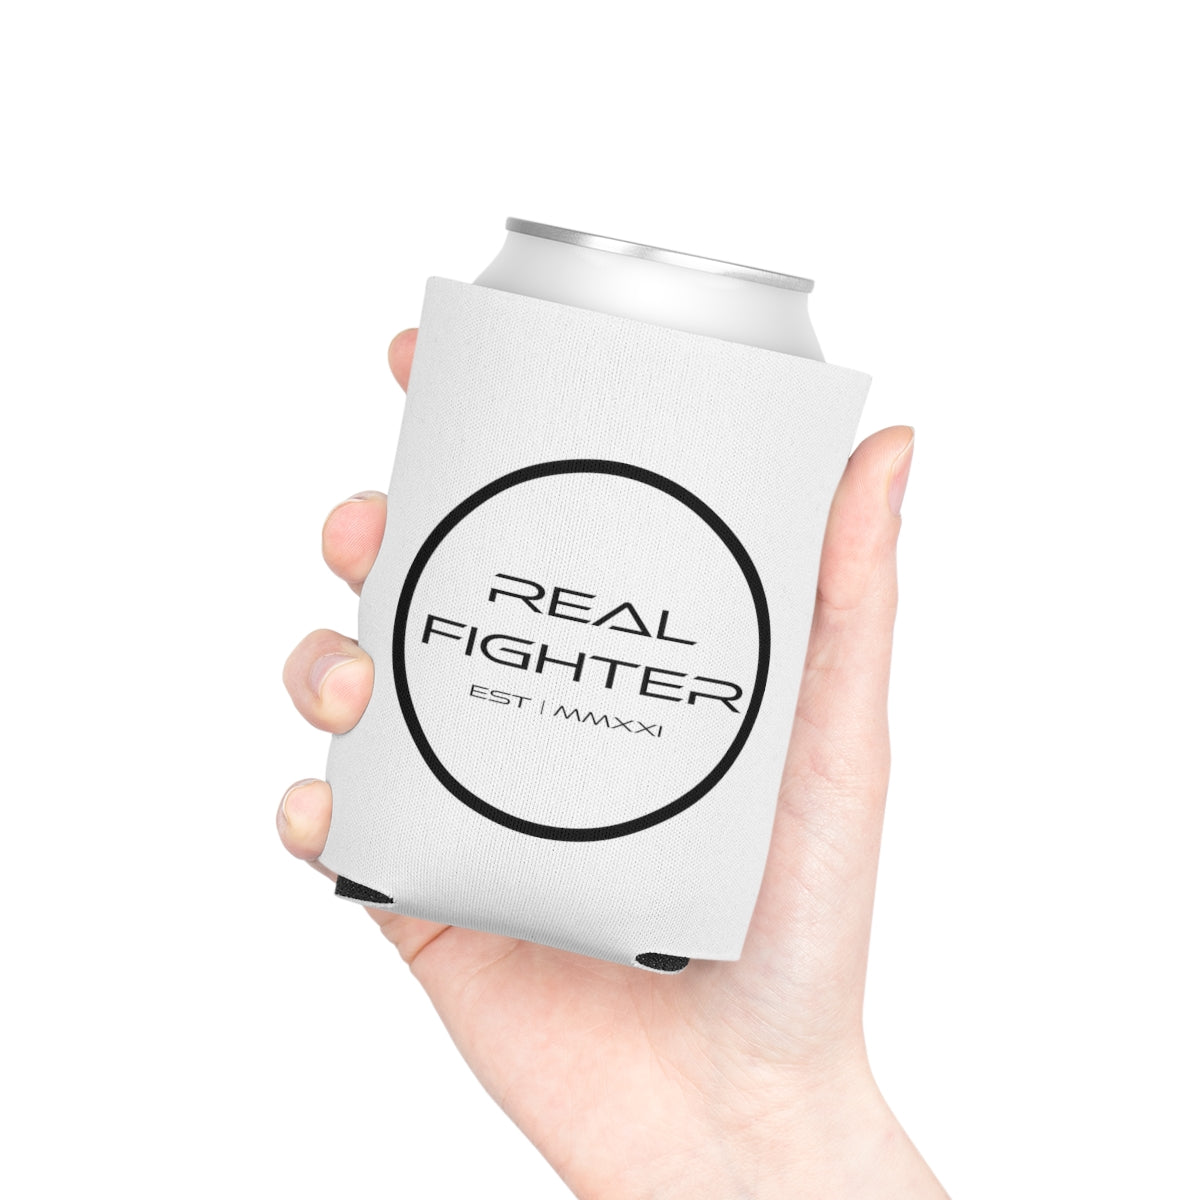 Real Fighter Brand™ Can Cooler